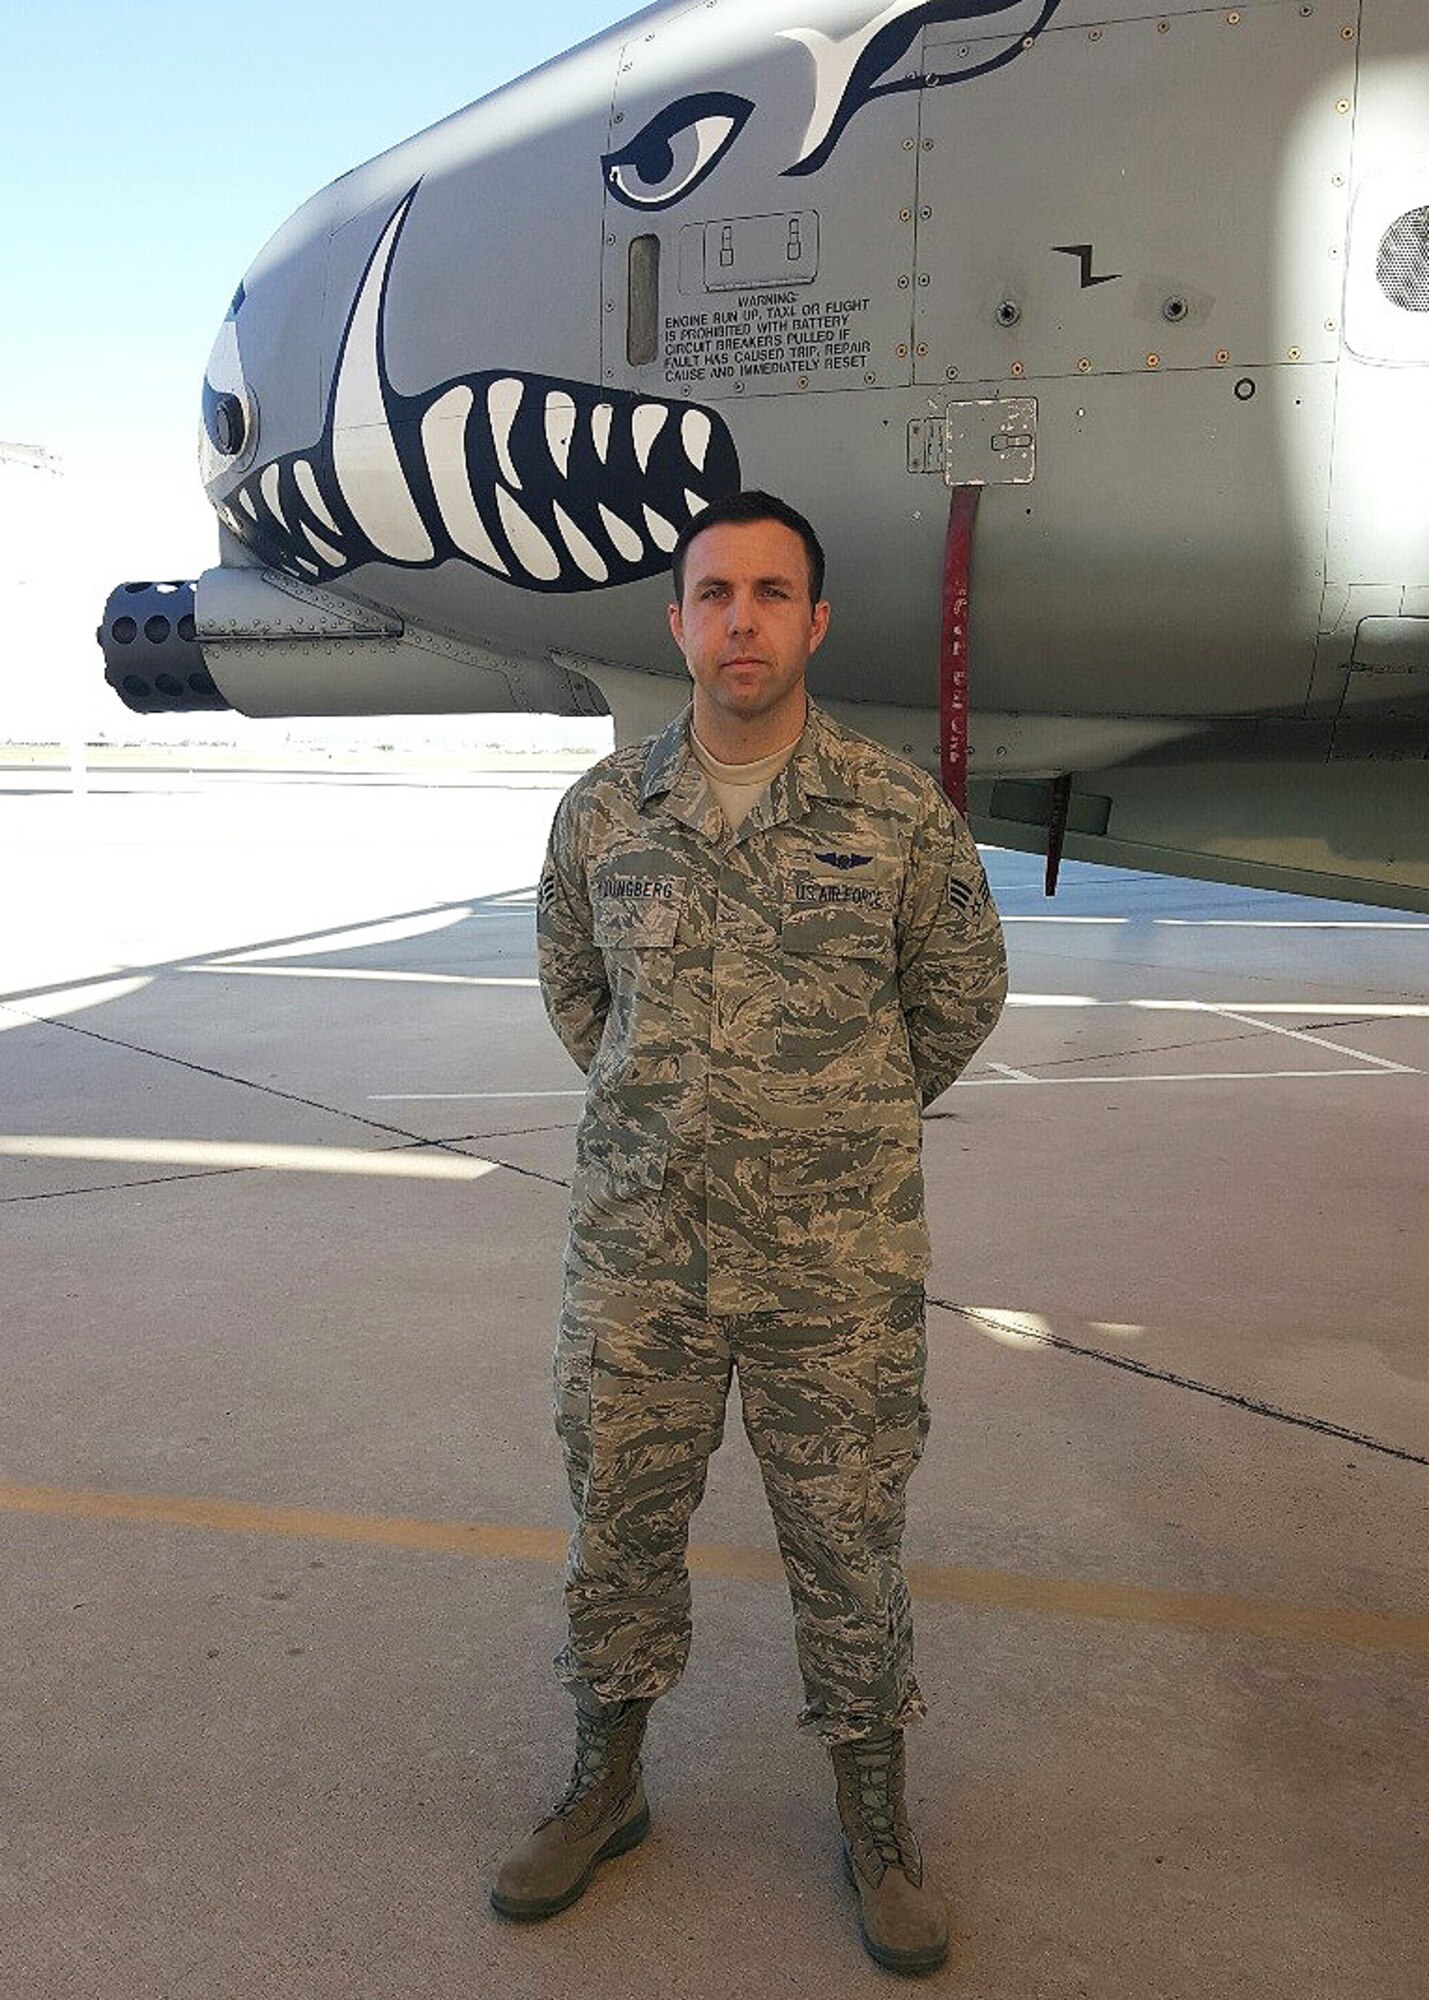 Senior Airman Joseph Youngberg, 924th Maintenance Squadron aircraft medals technology journeyman, quick thinking and actions helped save the life of a complete stranger after a stabbing incident on the Fourth of July in Tucson Arizona.  Originally from Murphysboro, Ill., he joined the Air Force in 2004 spending four years on active duty as a load master, after a break in service he decided to continue his military service and joined the Air Force Reserve in 2015.